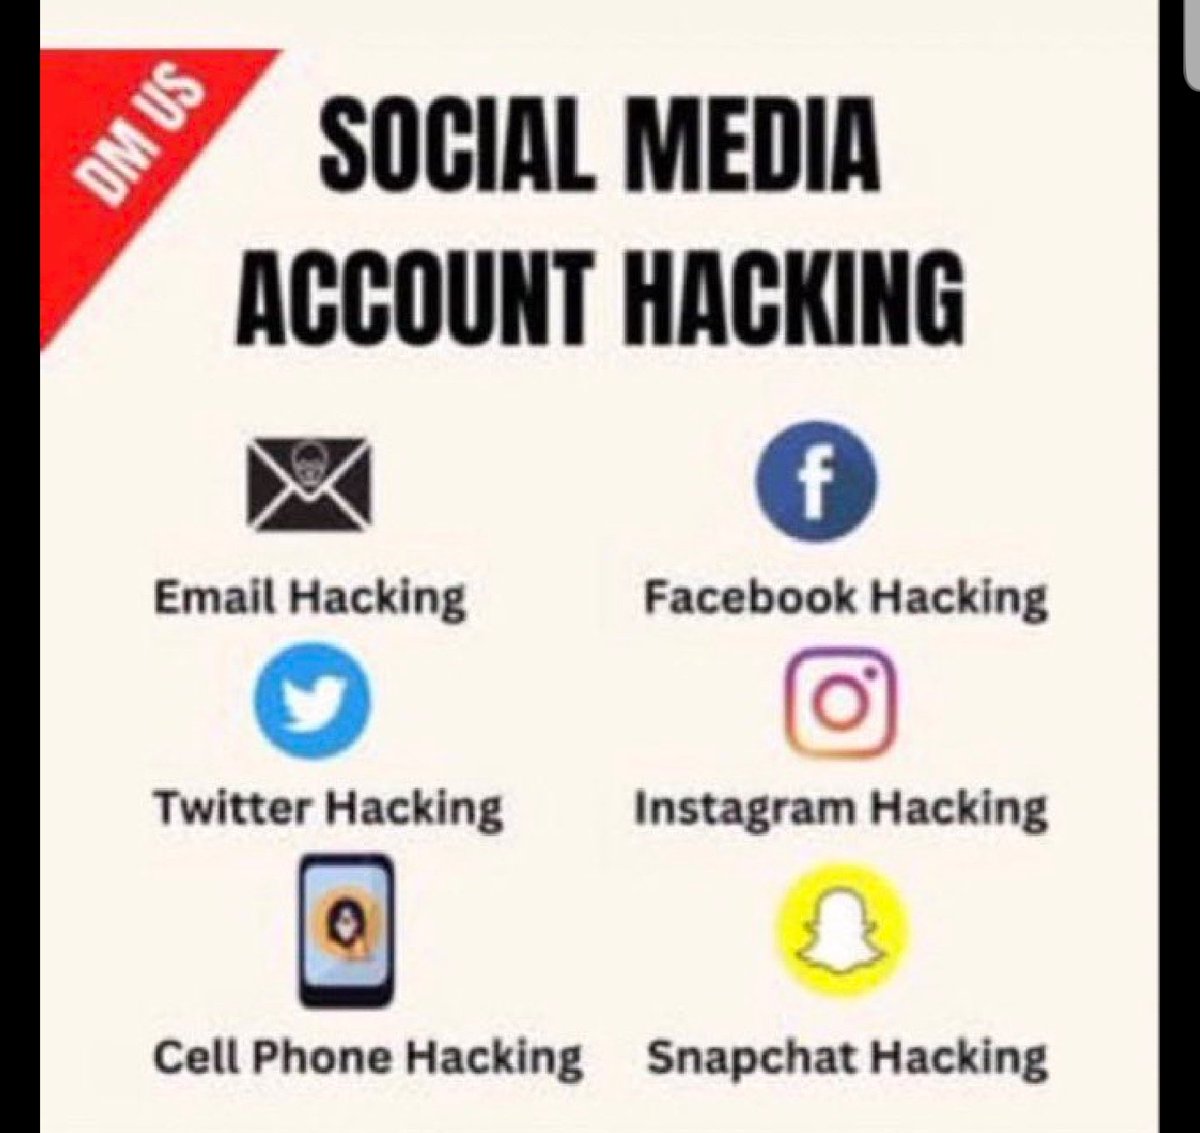 If you need Help recovering any Account, Mails, Tiktok, Snapchat, Instagram etc.
I'm available for assistance
#hacked #facebookdown #whatsapp #hackedinstagram #twitterdown #lockedaccount #metamask #ransomware #alterworld
#hacked